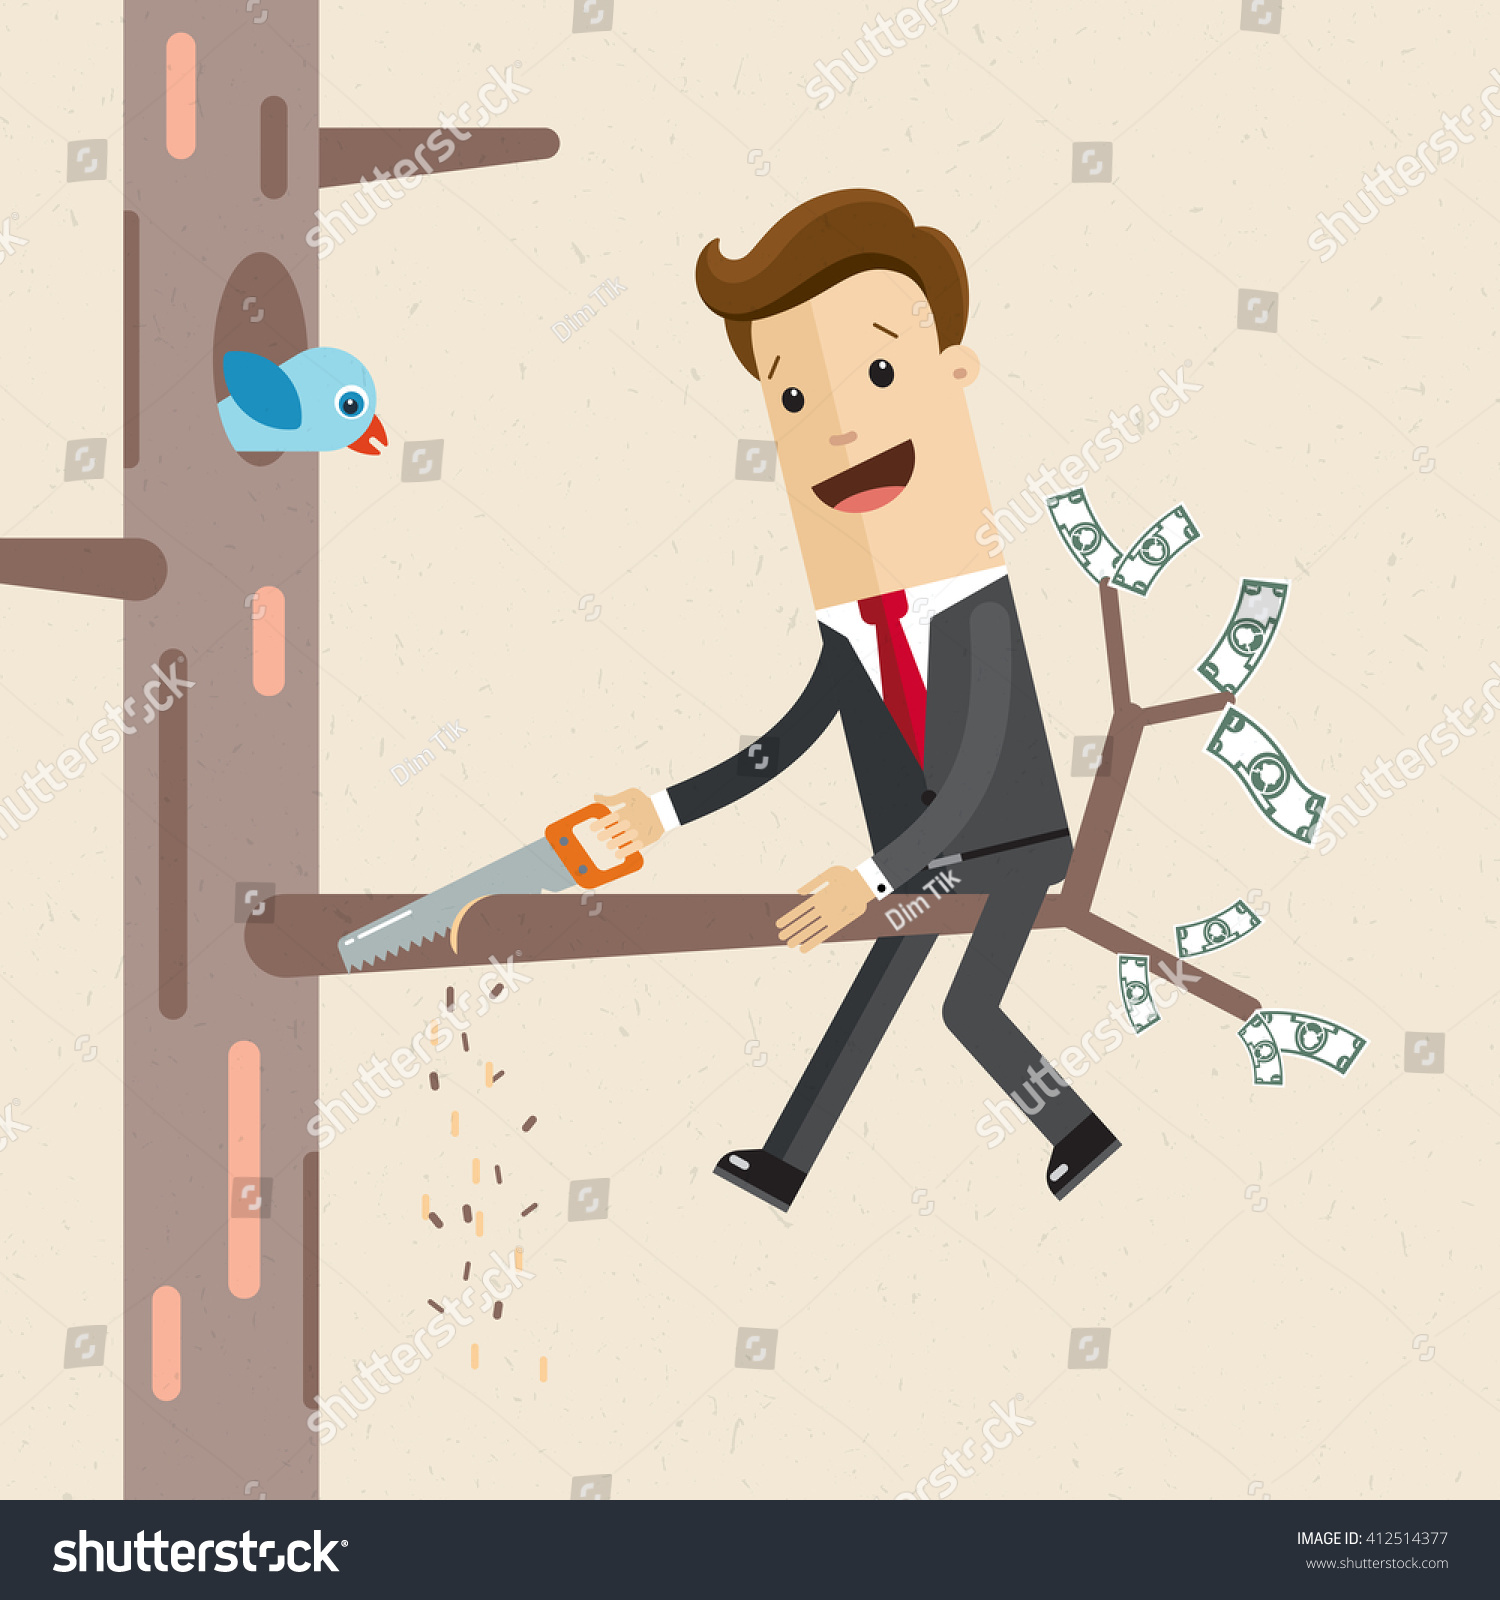 stock-vector-salesman-is-cutting-a-tree-branch-on-which-he-is-sitting-a-man-in-a-suit-sits-on-a-tree-with-a-412514377.jpg